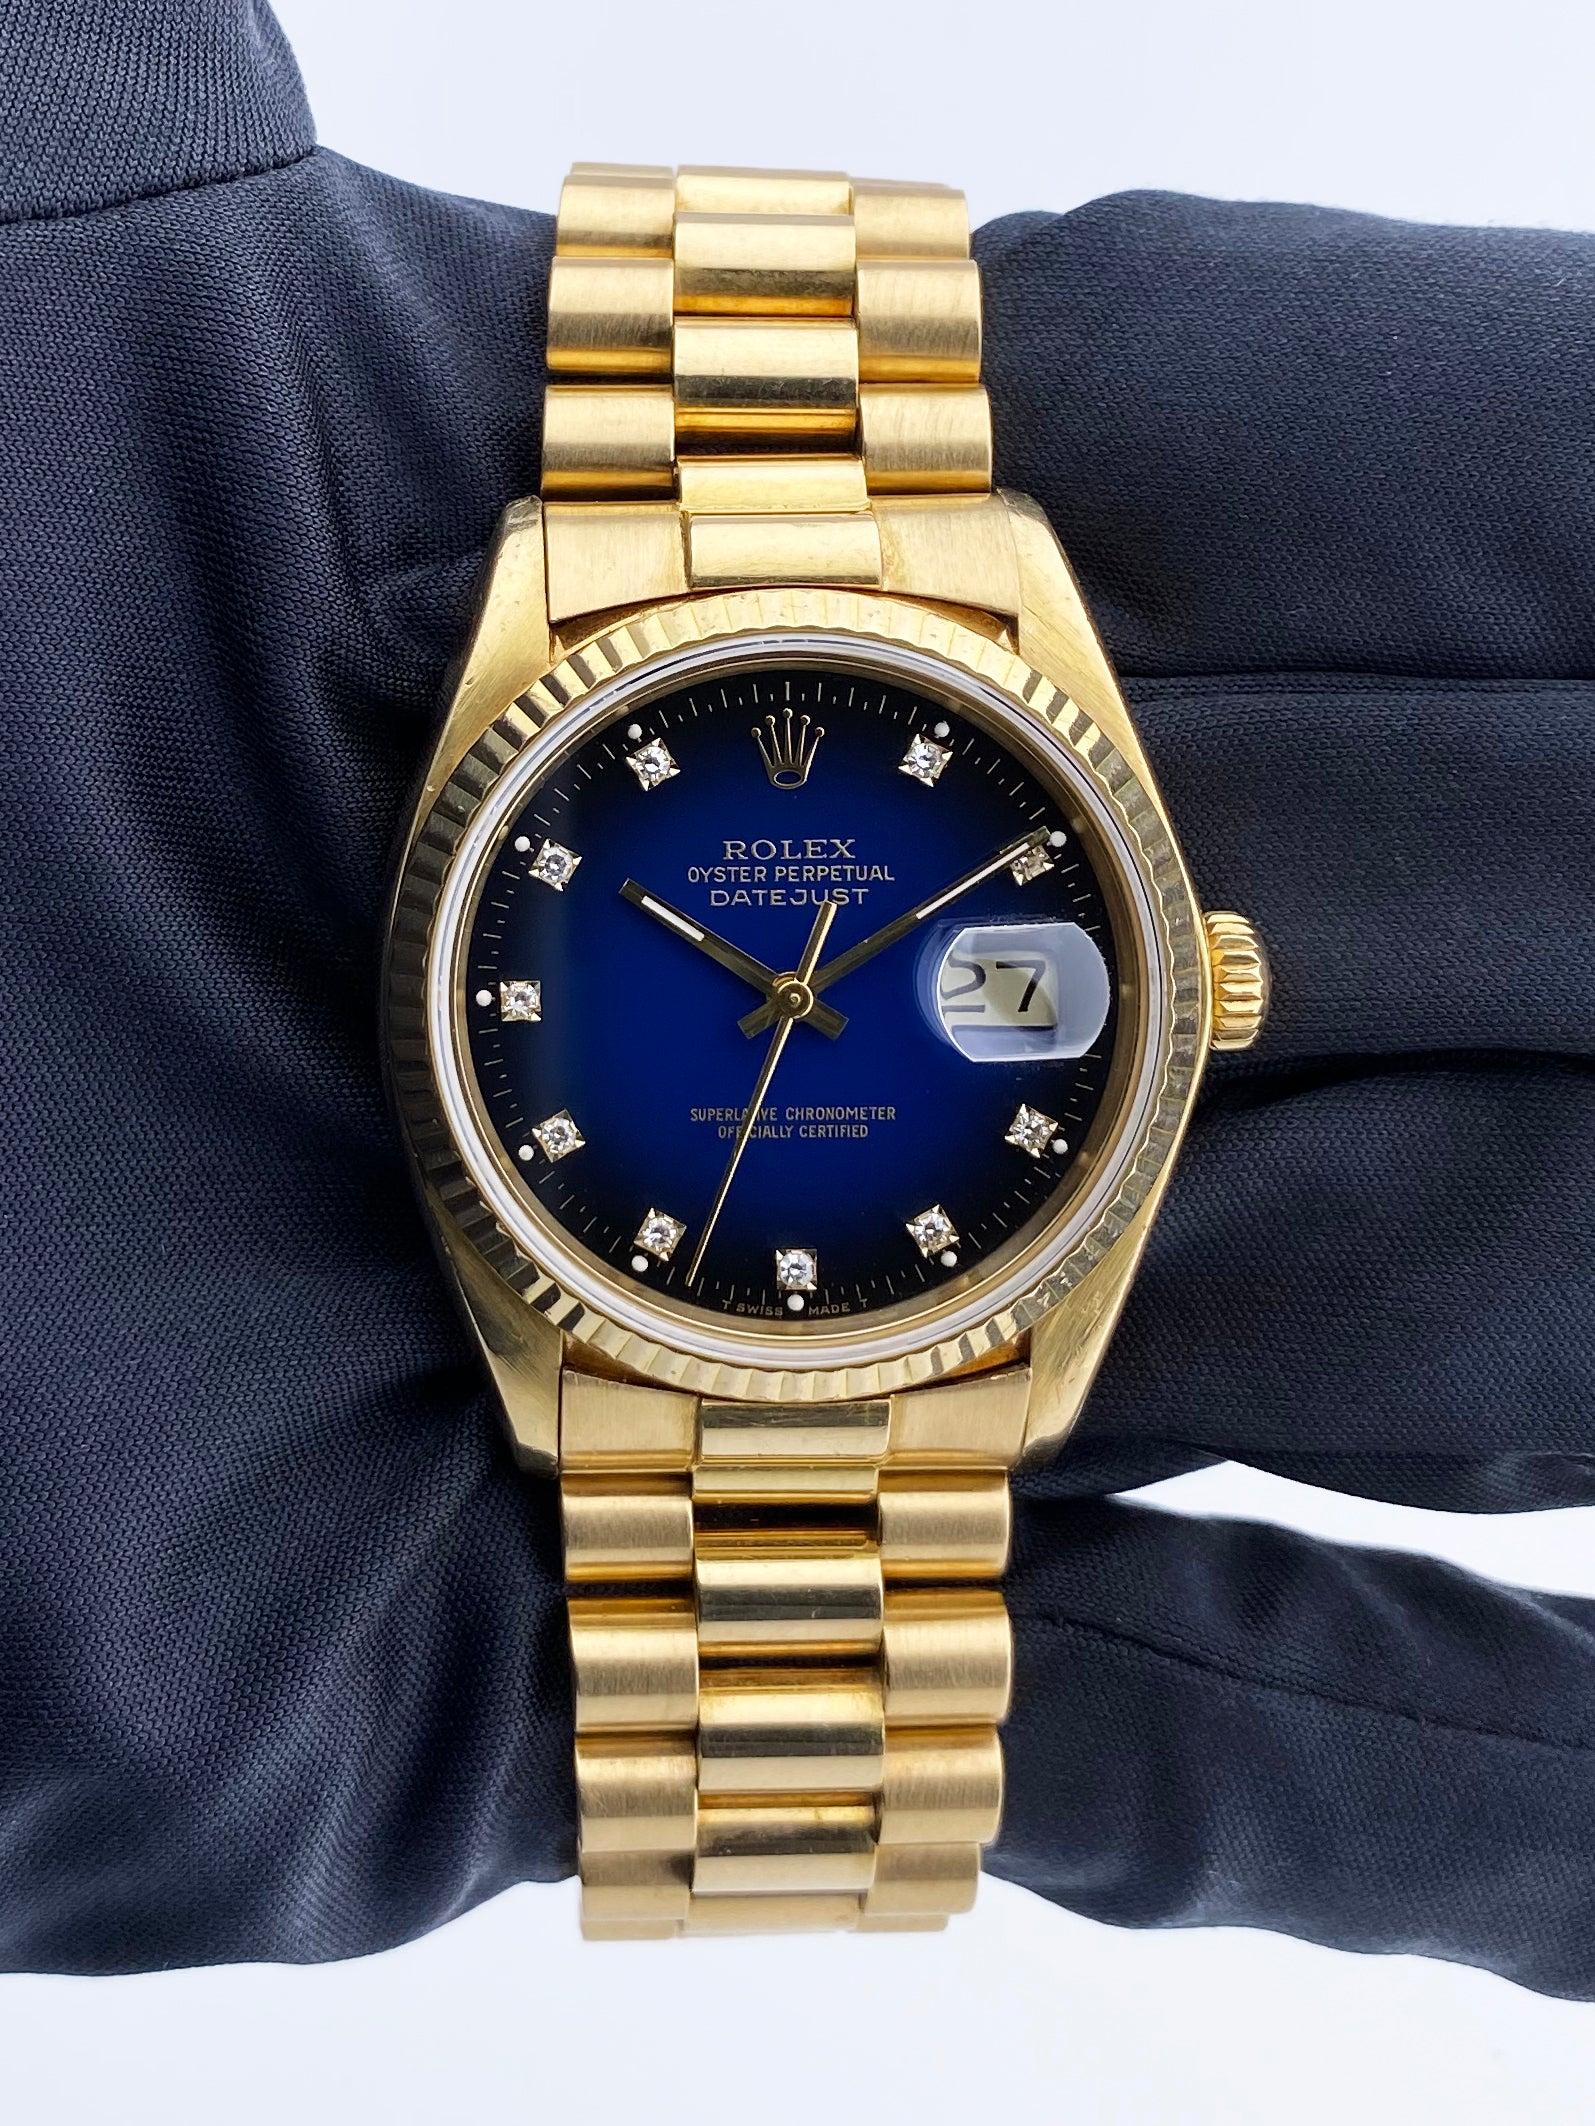 Rolex Datejust 16018 Mens Watch. 36mm 18K yellow gold case. 18K yellow gold fluted bezel. Blue vignette dial with gold hands and original factory diamond set hour markers. Minute markers on the outer dial. Date display at the 3 o'clock position. 18k